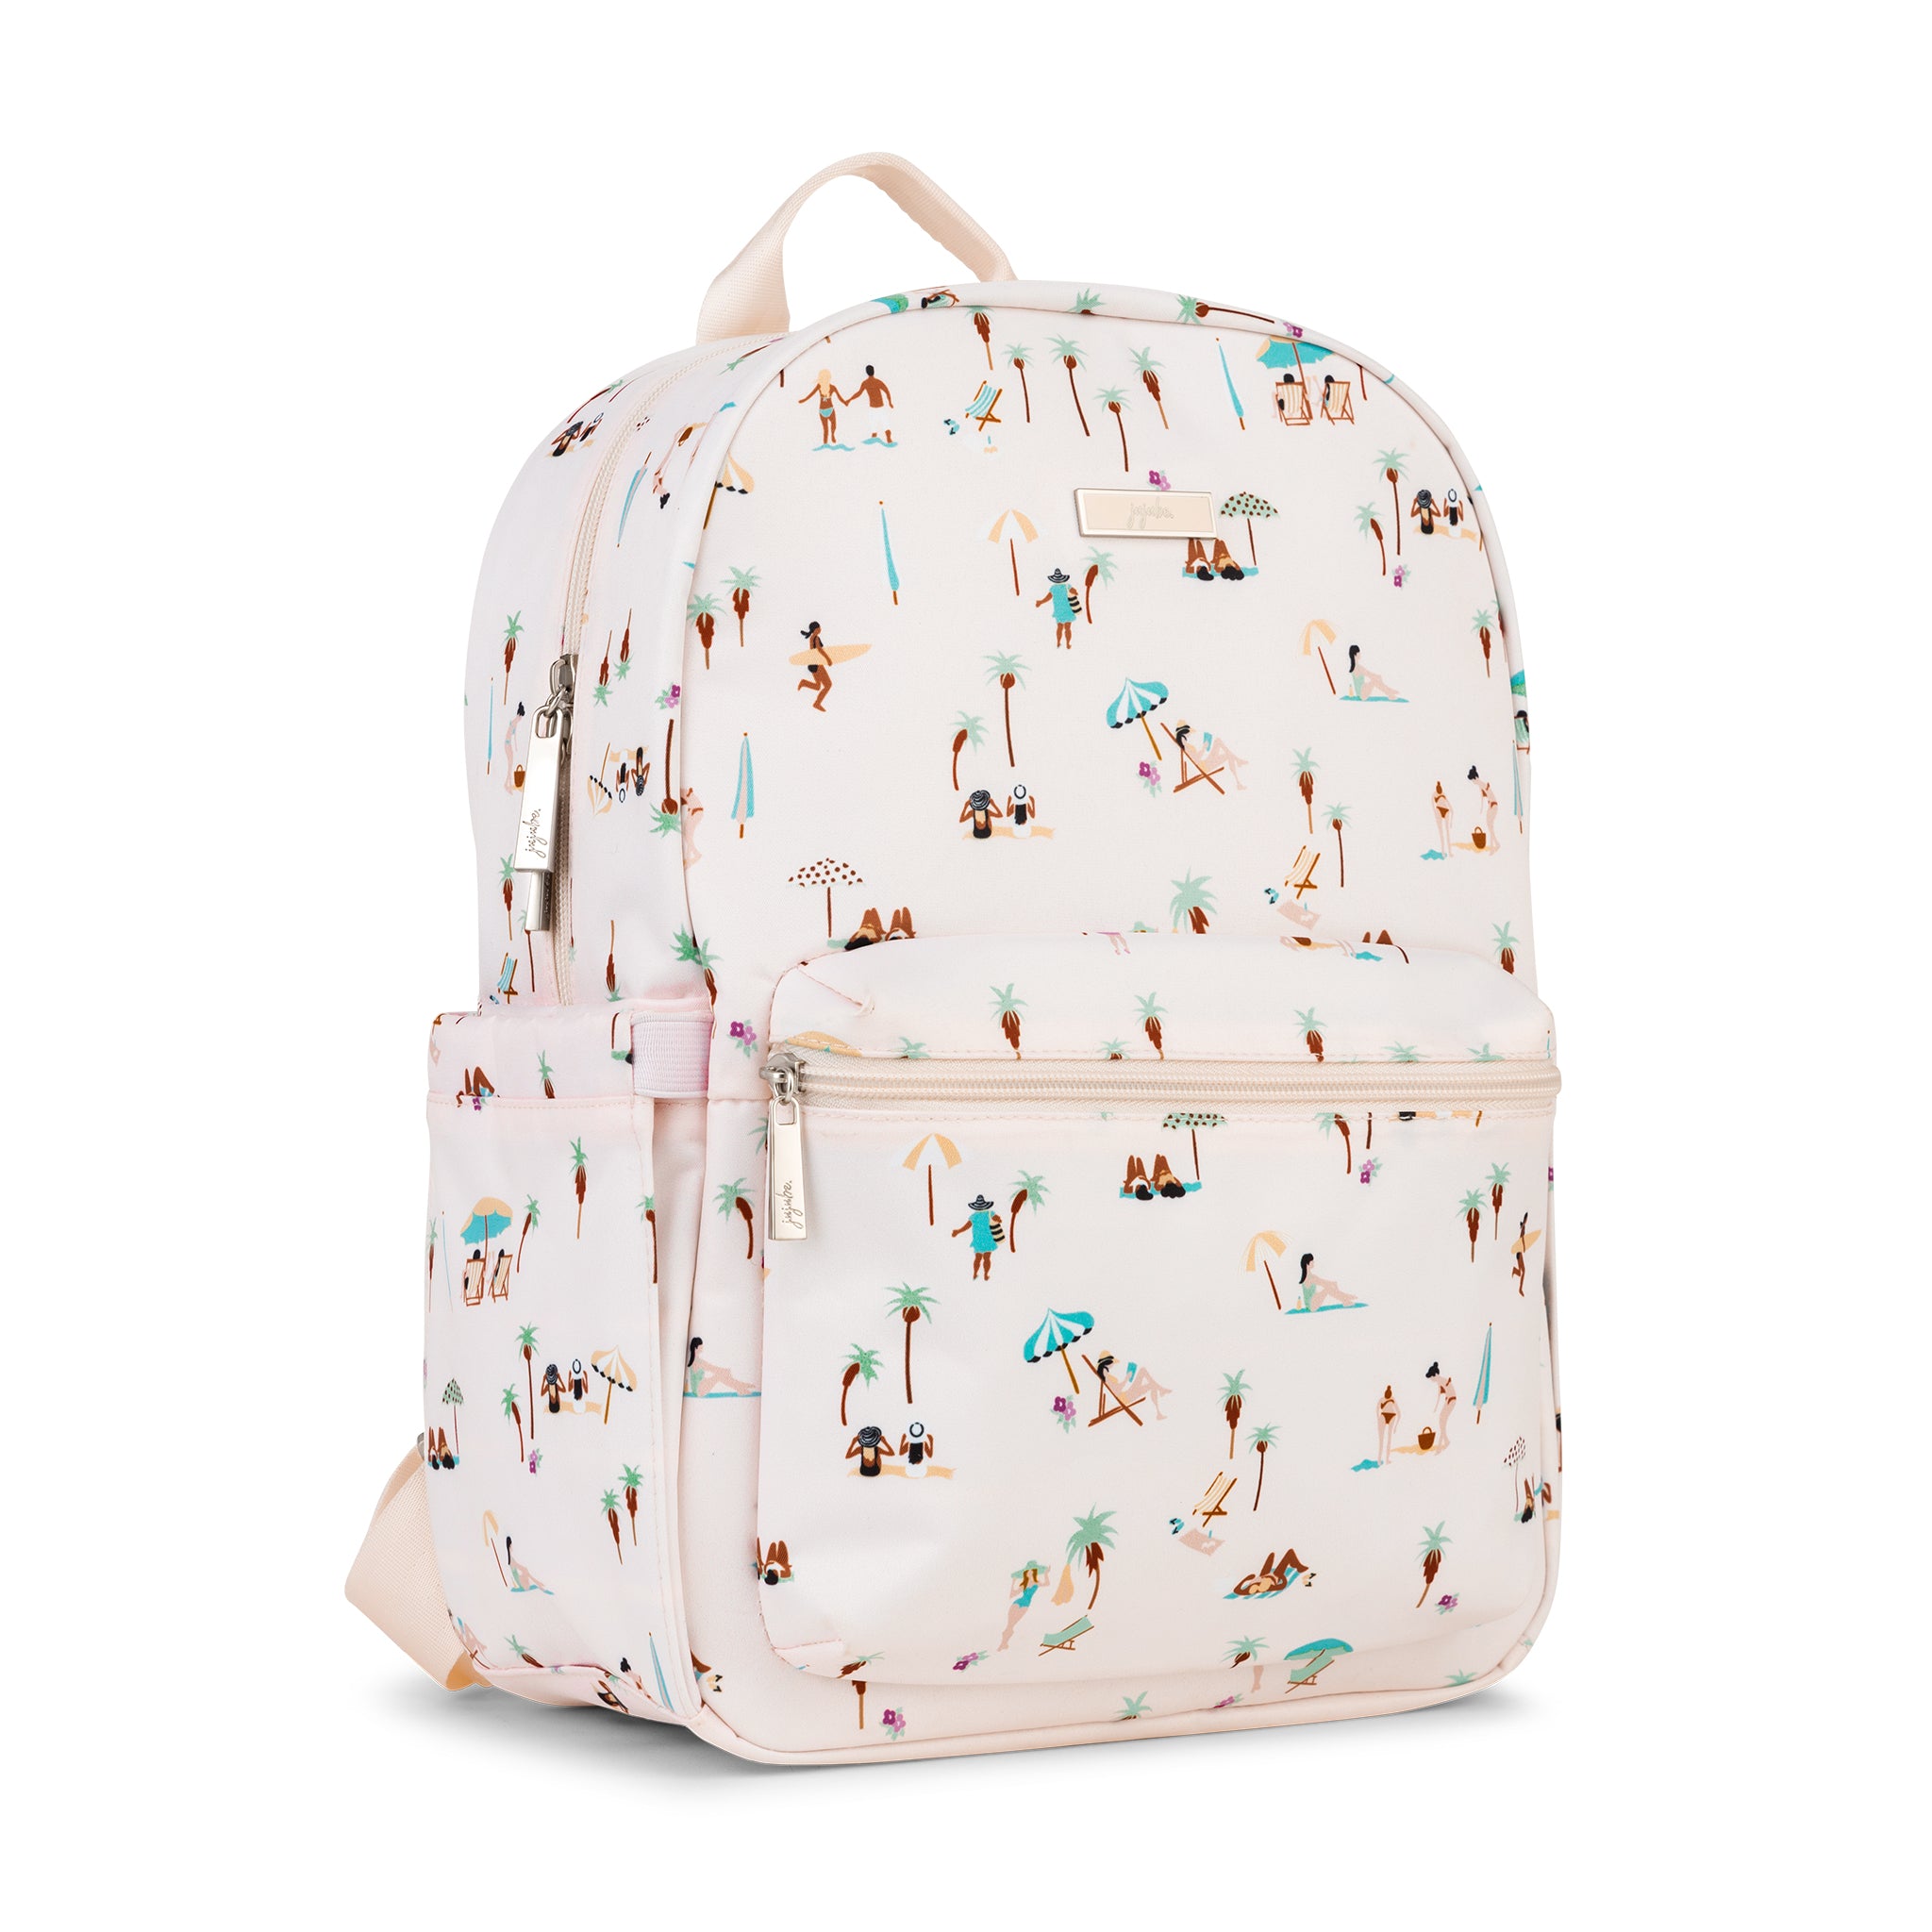 Multicolor sunbathers, surfers, palm trees and beach umbrellas on pale blush background Midi Backpack Quarter Angle View